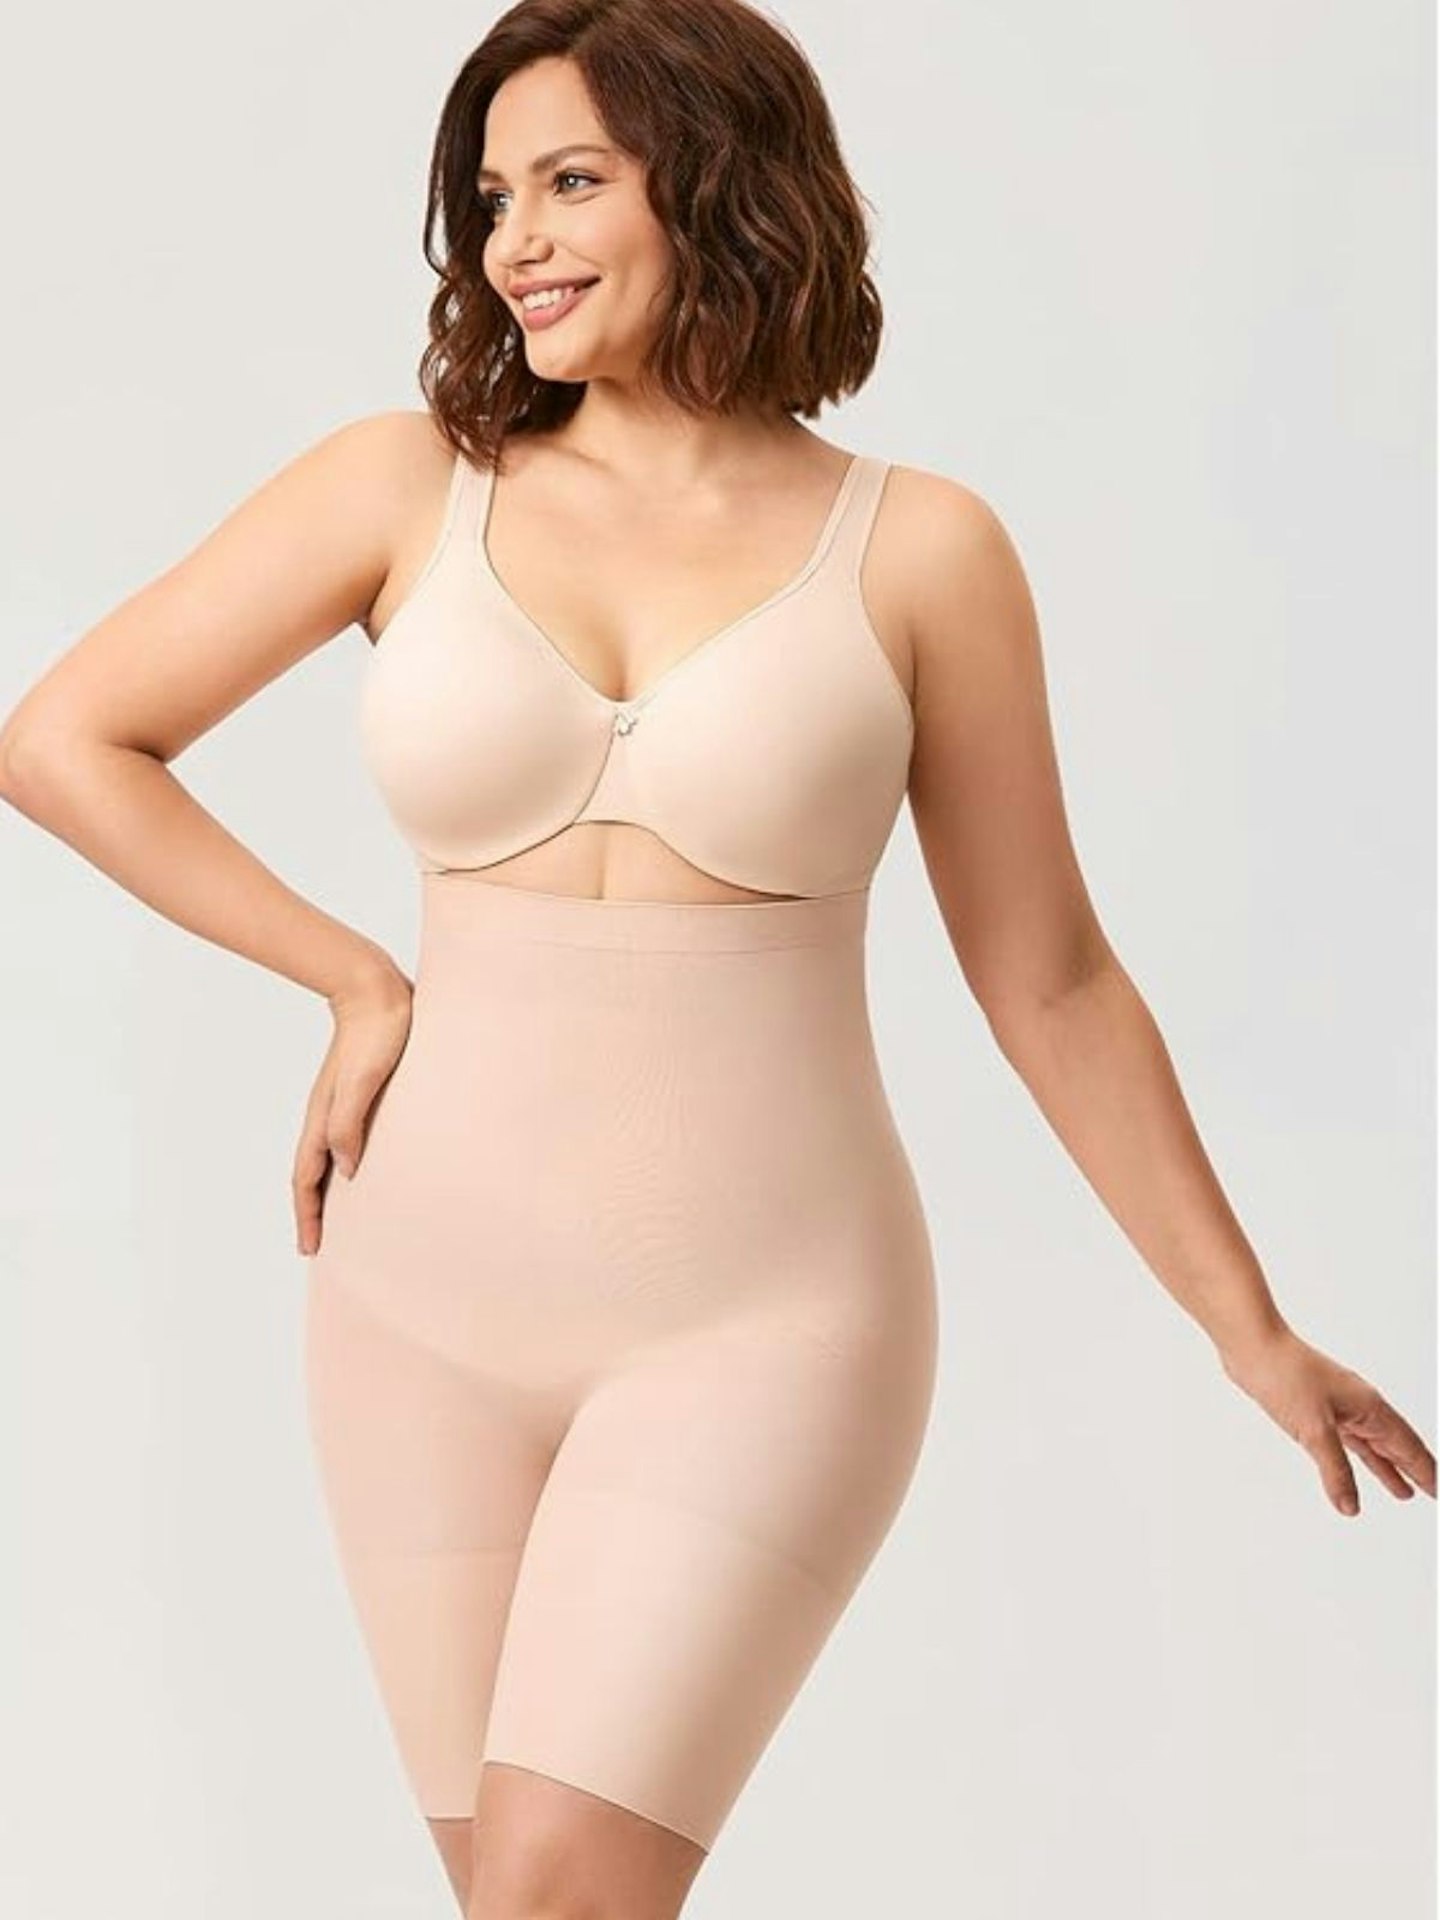 Women's Shapewear Extreme Tummy Control Shapewear Shorts with Zipper  Adjustable Bodysuit womens tops (Beige, S) at  Women's Clothing store